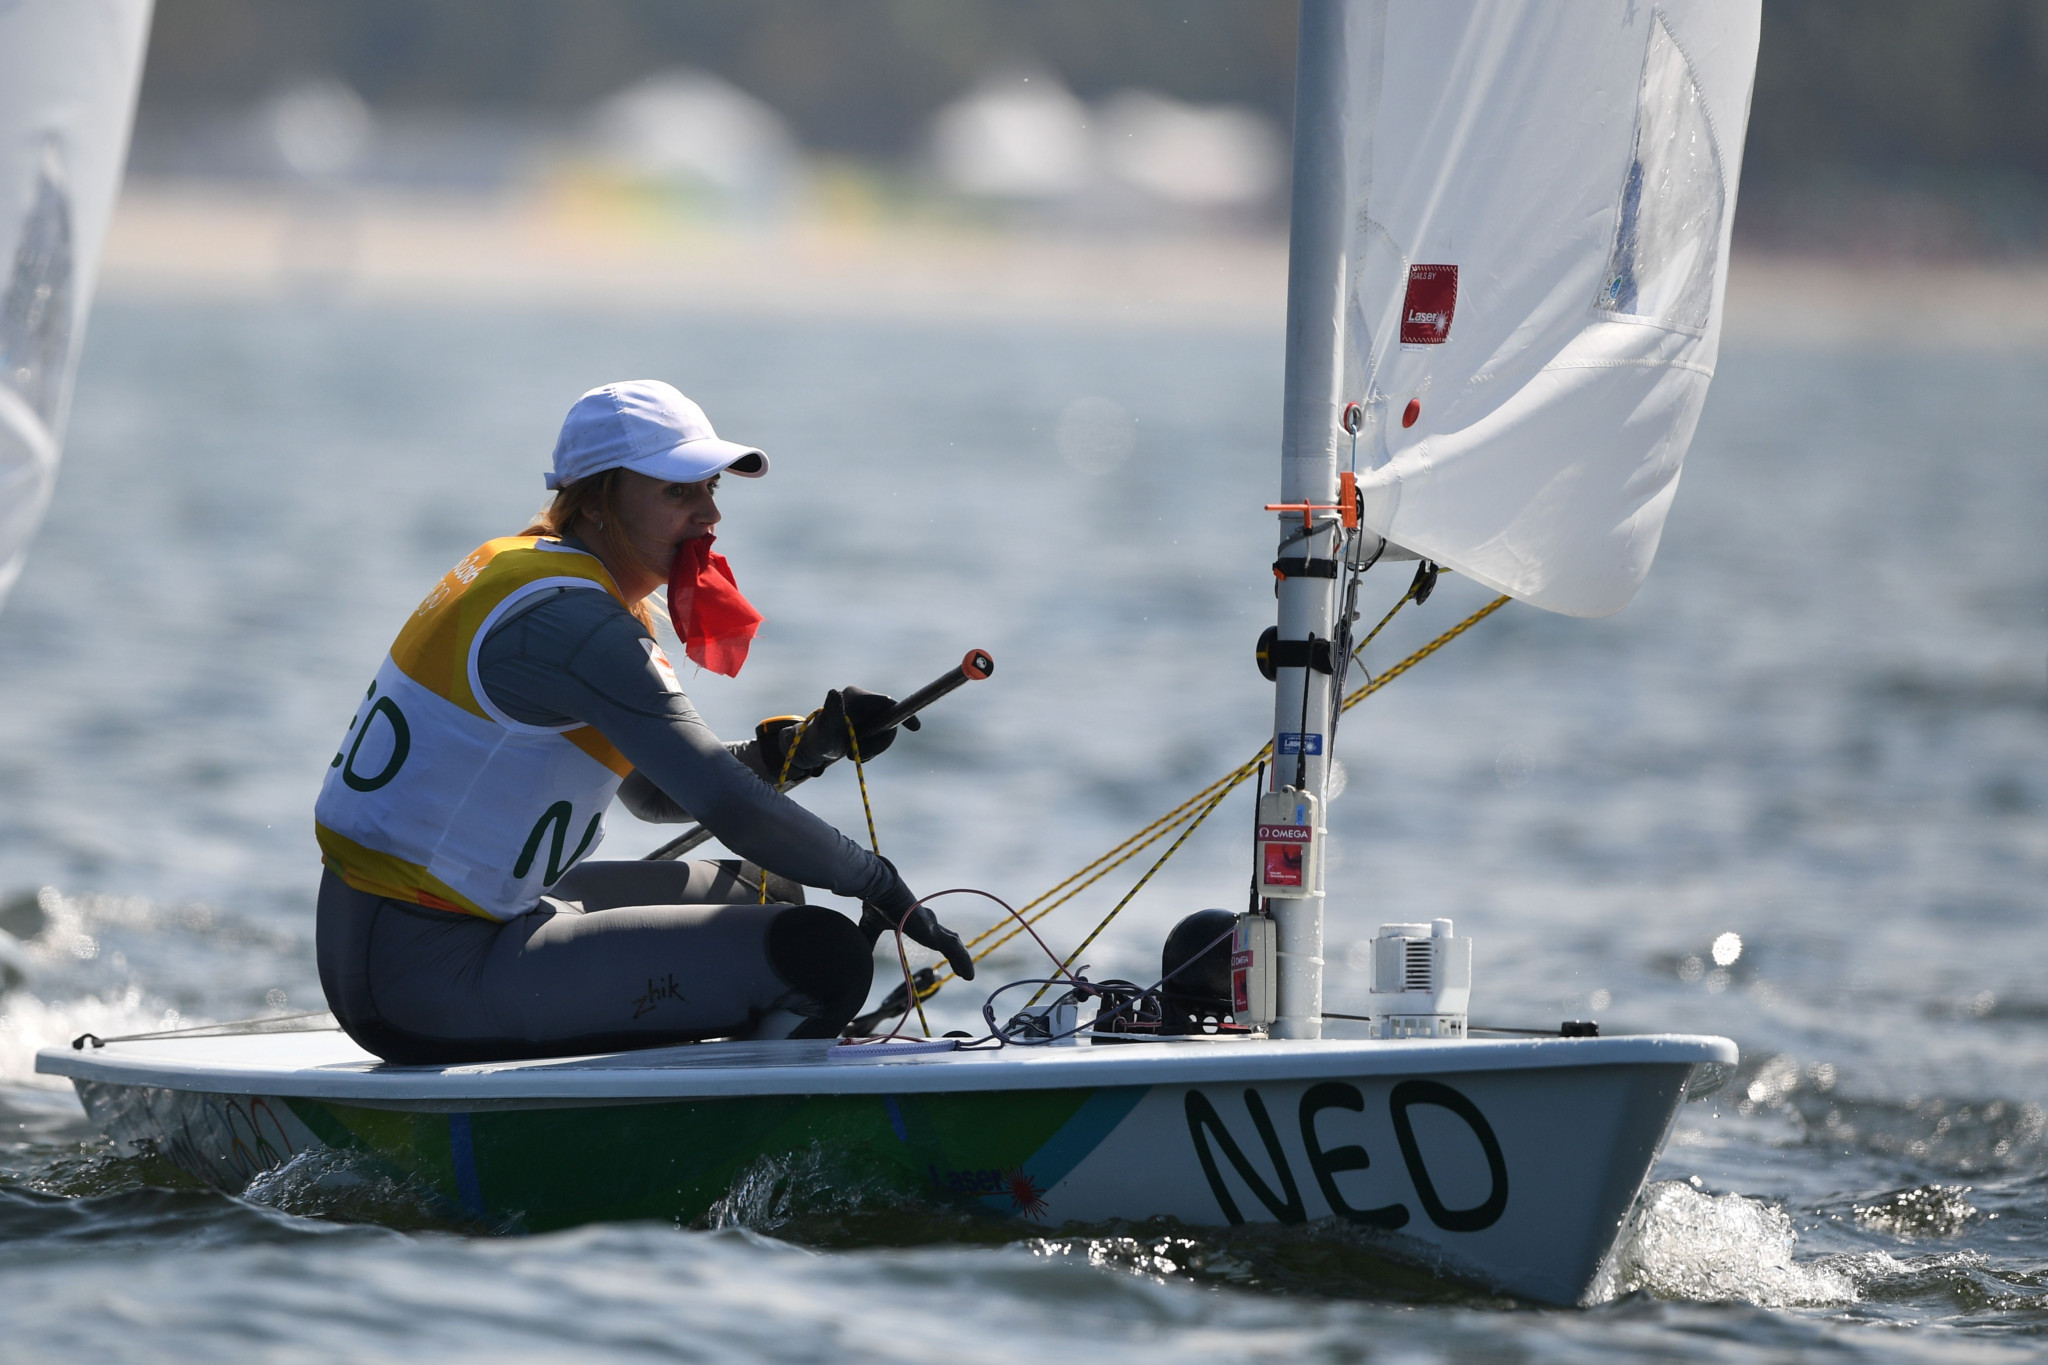 Marit Bouwmeester leads the women's laser radial event ©Getty Images